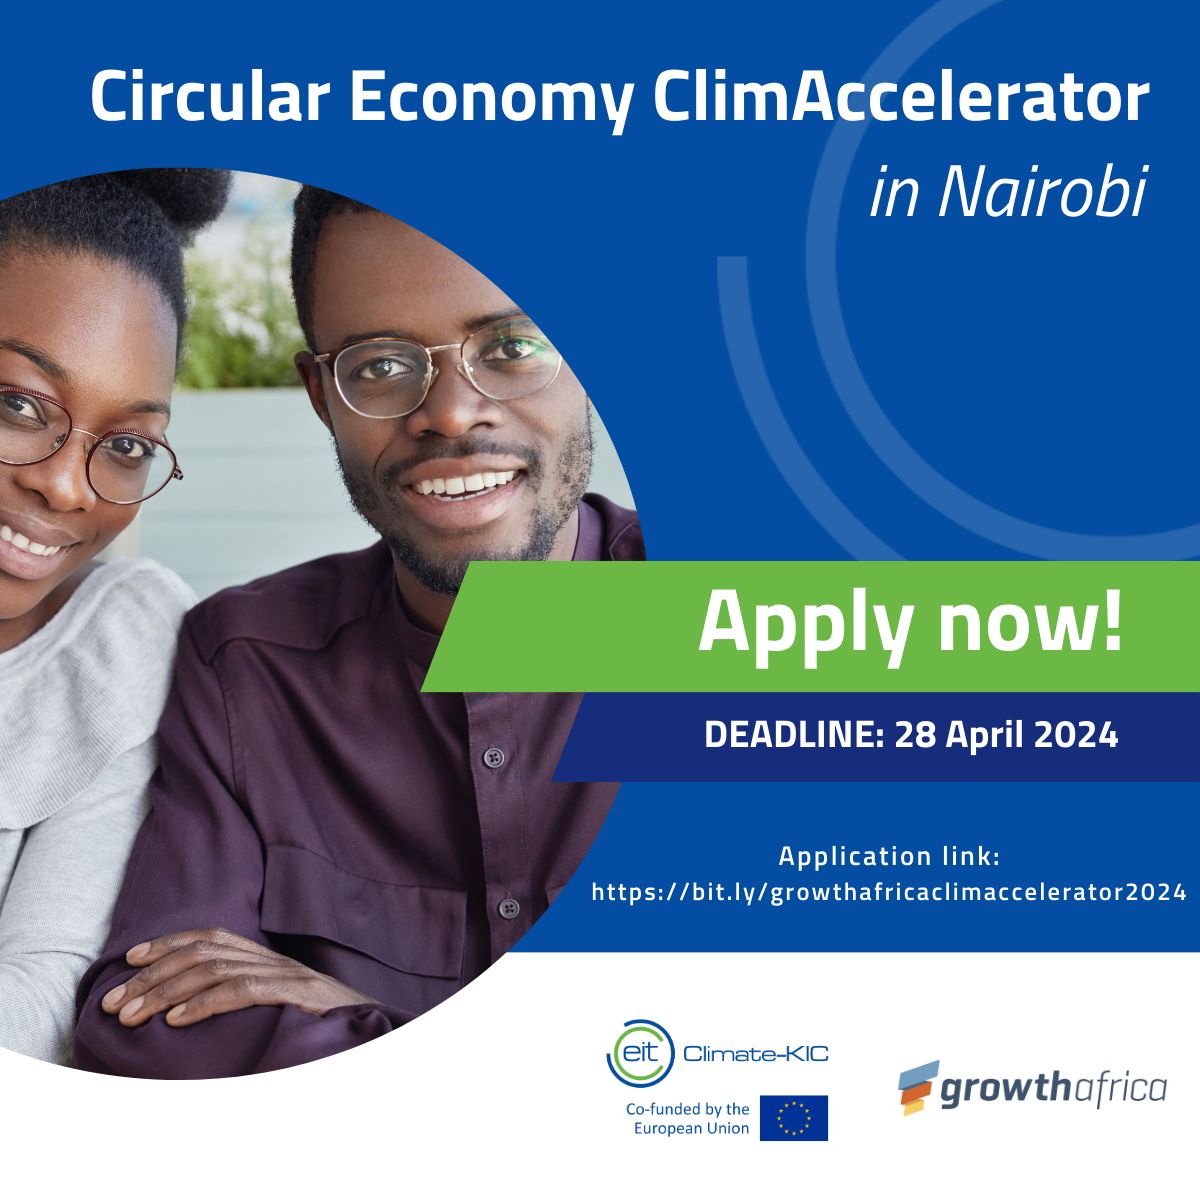 🌍 Join the #CircularEconomy ClimAccelerator in Nairobi! This 6-month program, funded by IKEA Foundation and supported by Climate-KIC, empowers #sustainablebusinesses with #mentorship, workshops, funding, and investor access. Apply by April 28! Link bit.ly/3xbY1Sq